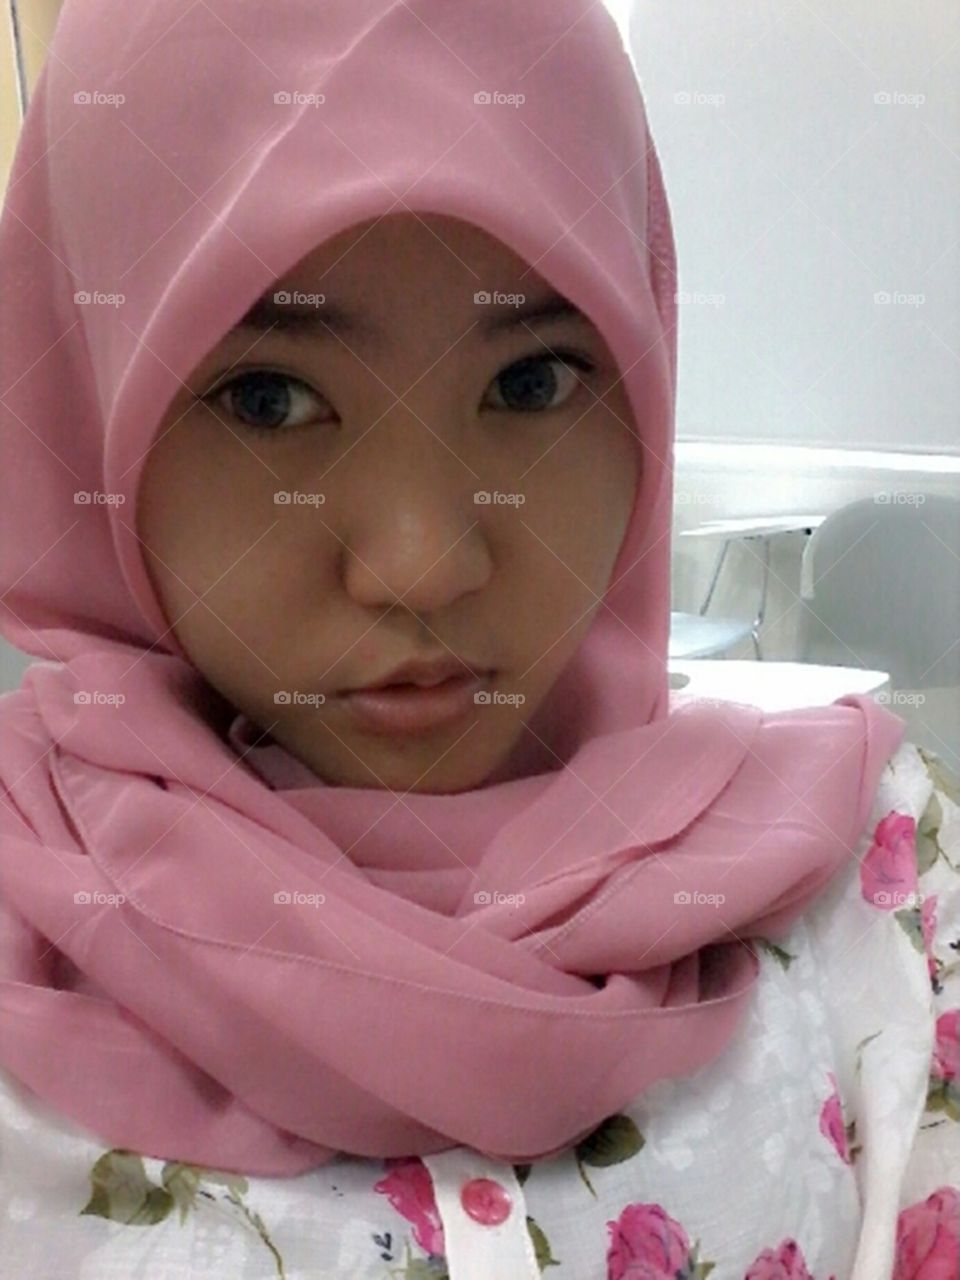 My wife Elisa wearing hijab. My wife wear hijab and took a pictue. She look like a child.